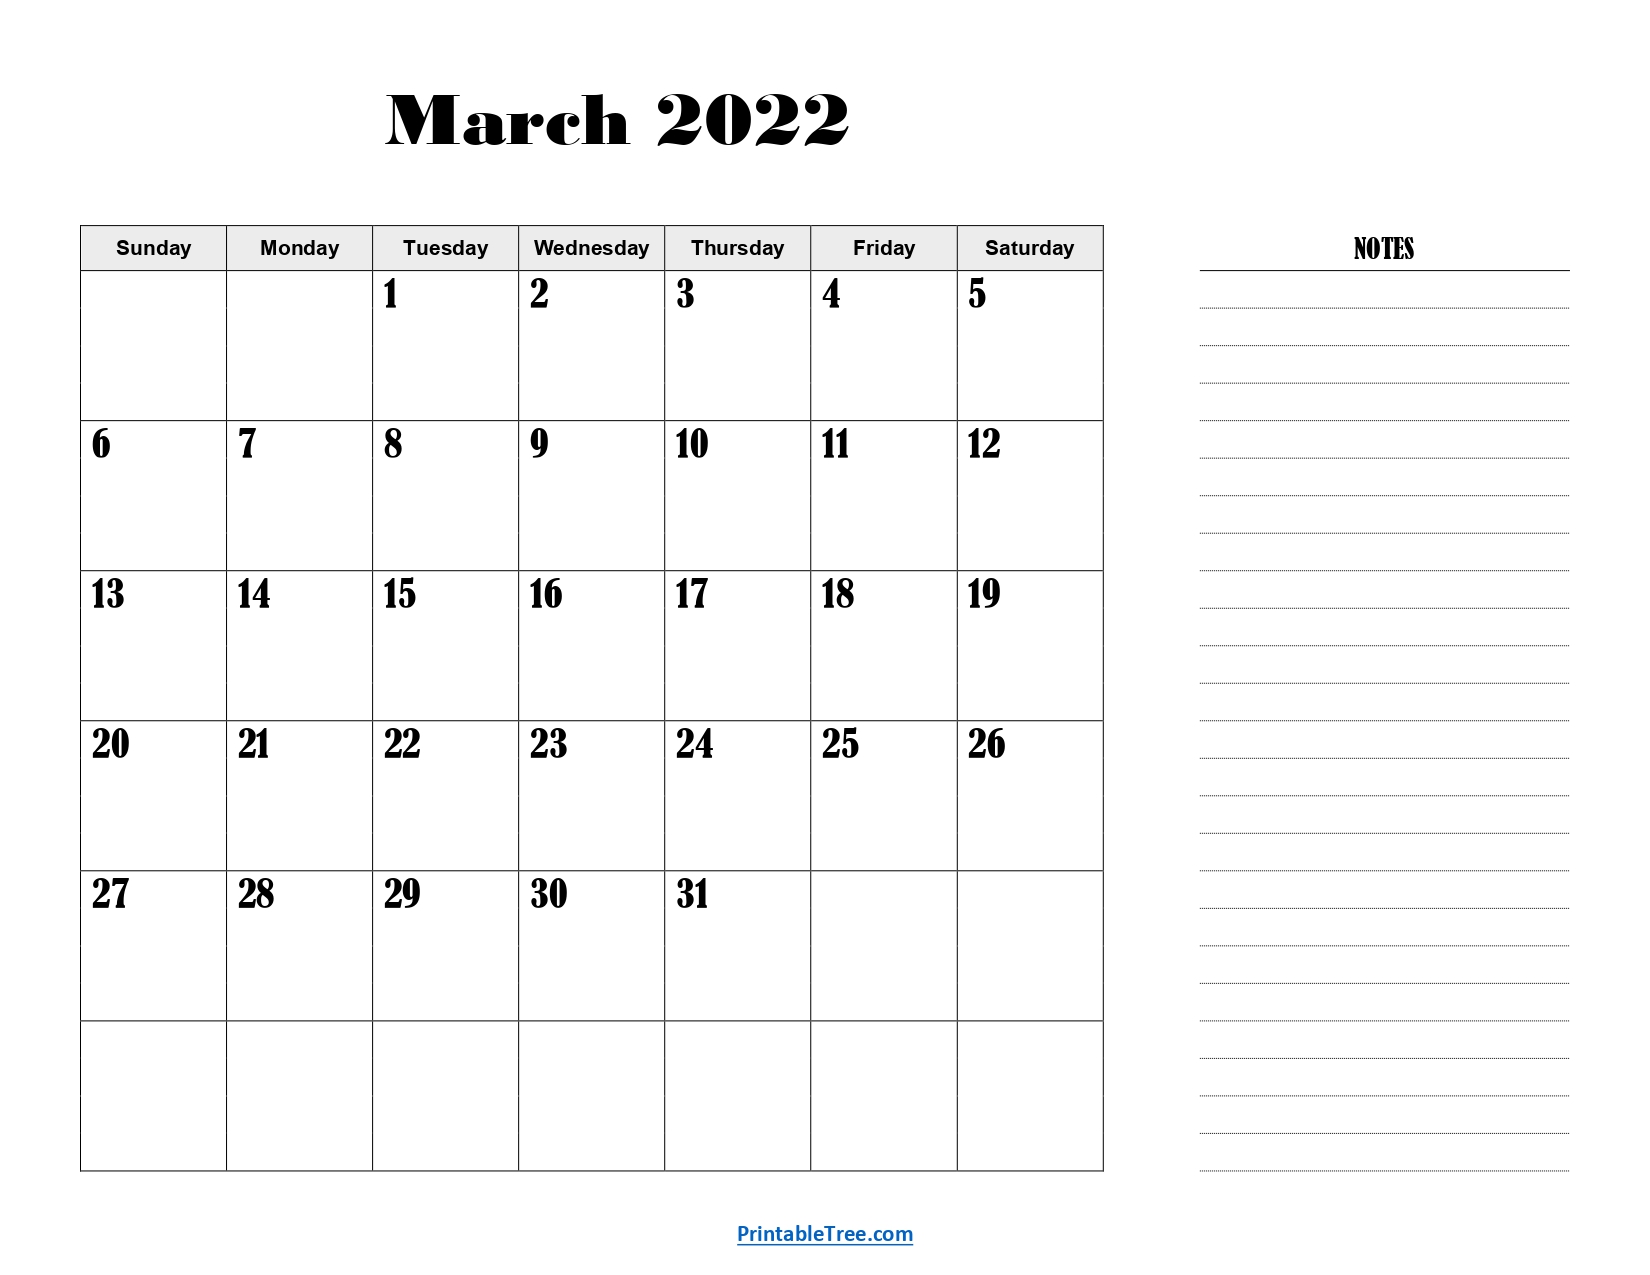 Landscape March 2022 Calendar with Notes